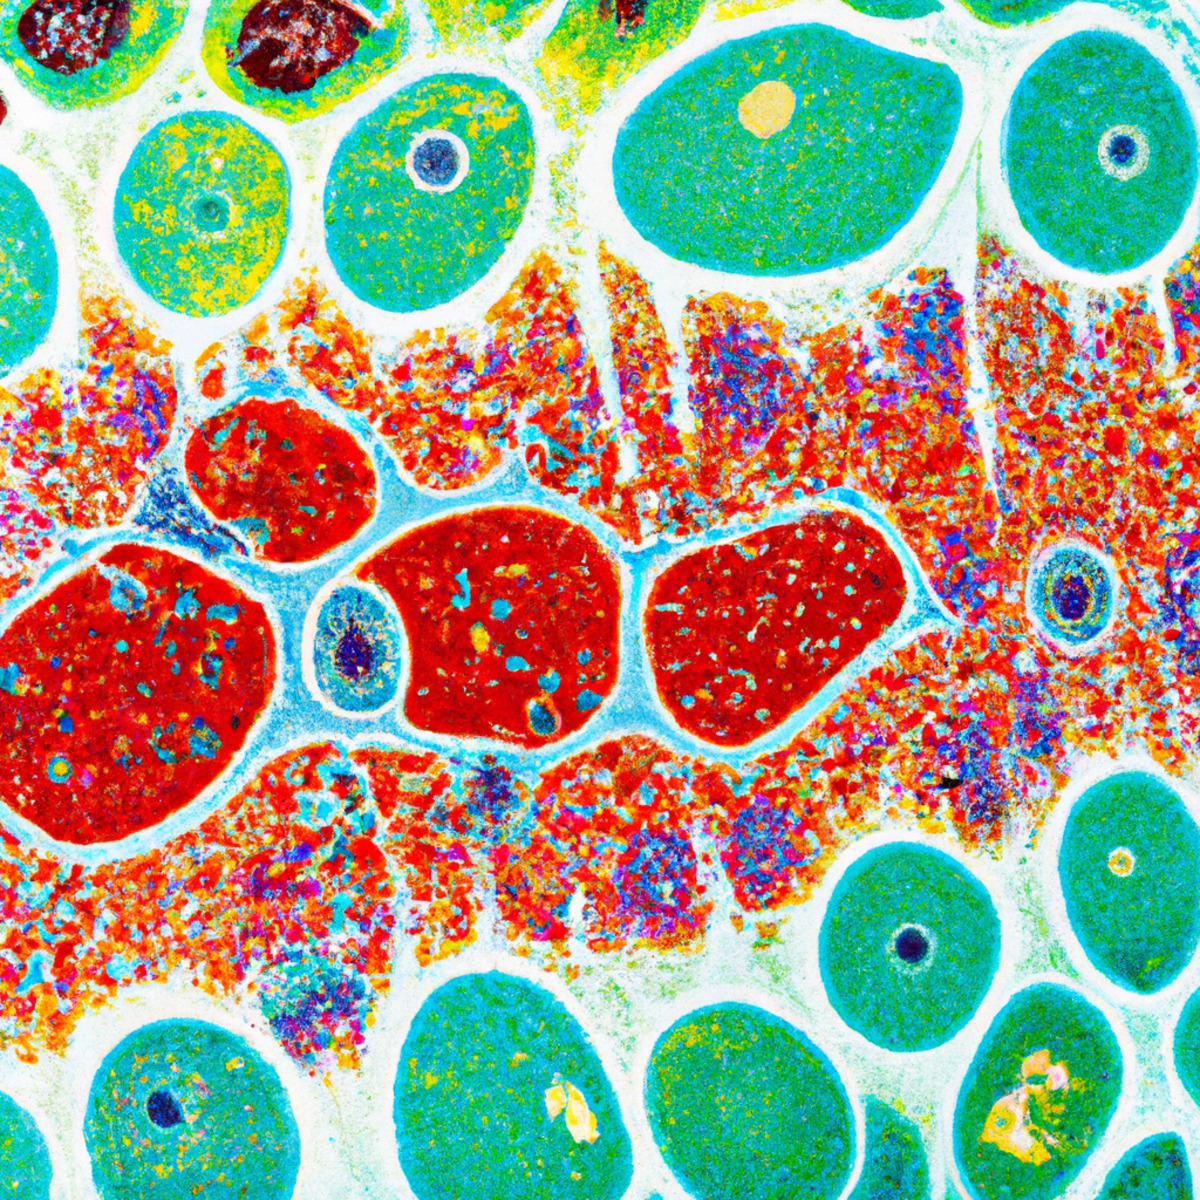 Close-up of laboratory microscope with vibrant glass slides displaying cellular structures and abnormalities, representing meticulous analysis of Gaucher disease.